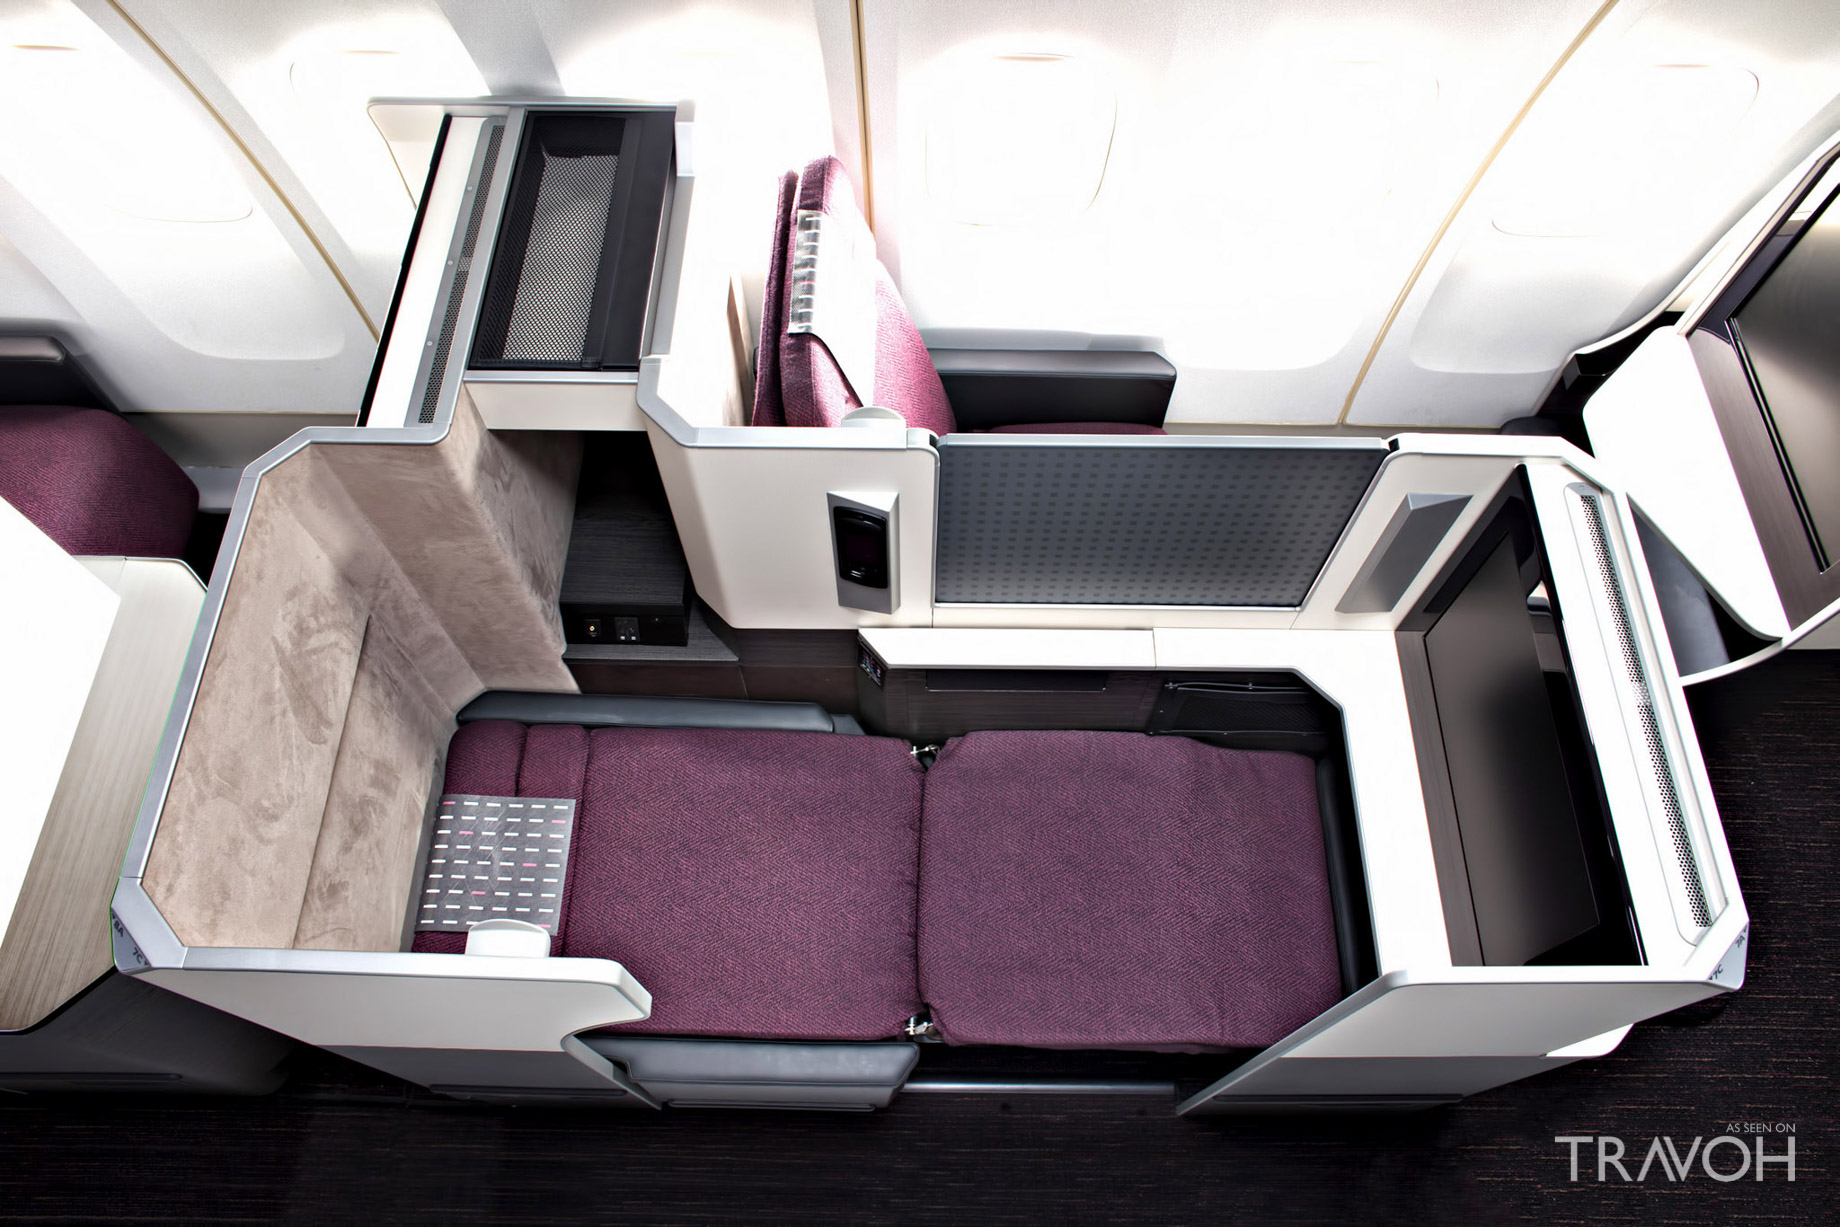 Japan Airlines - A New Travel Trend for Private Luxury Flights